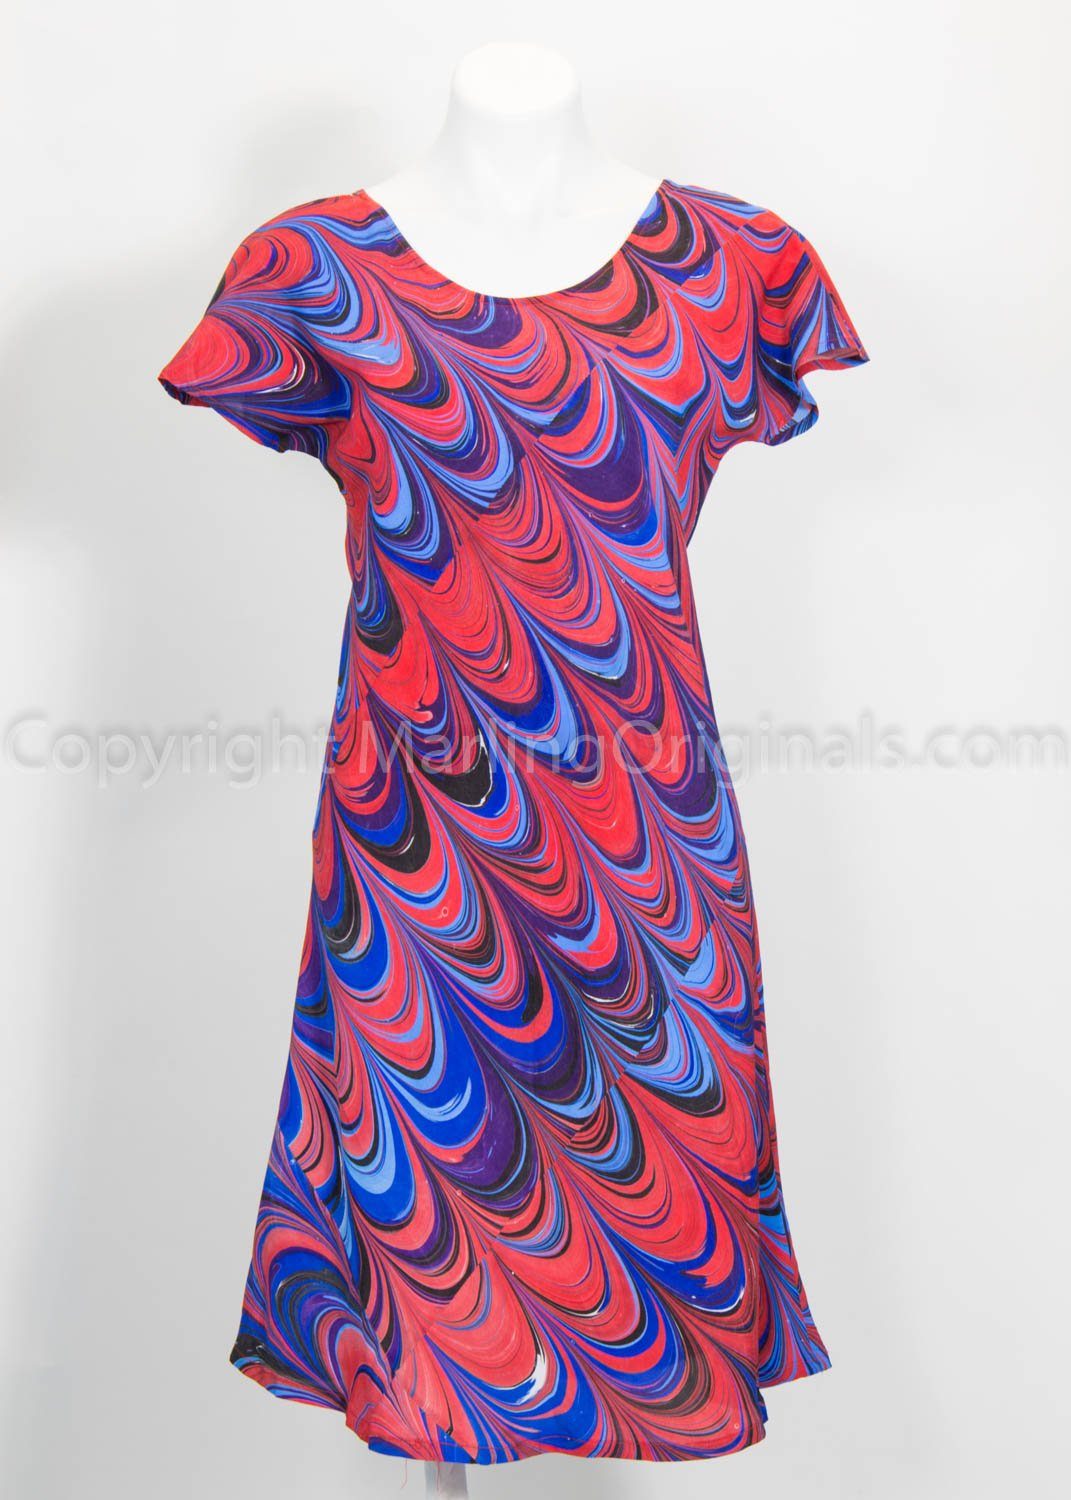 marbled dress in vibrant red, blues , black and purple cascade pattern